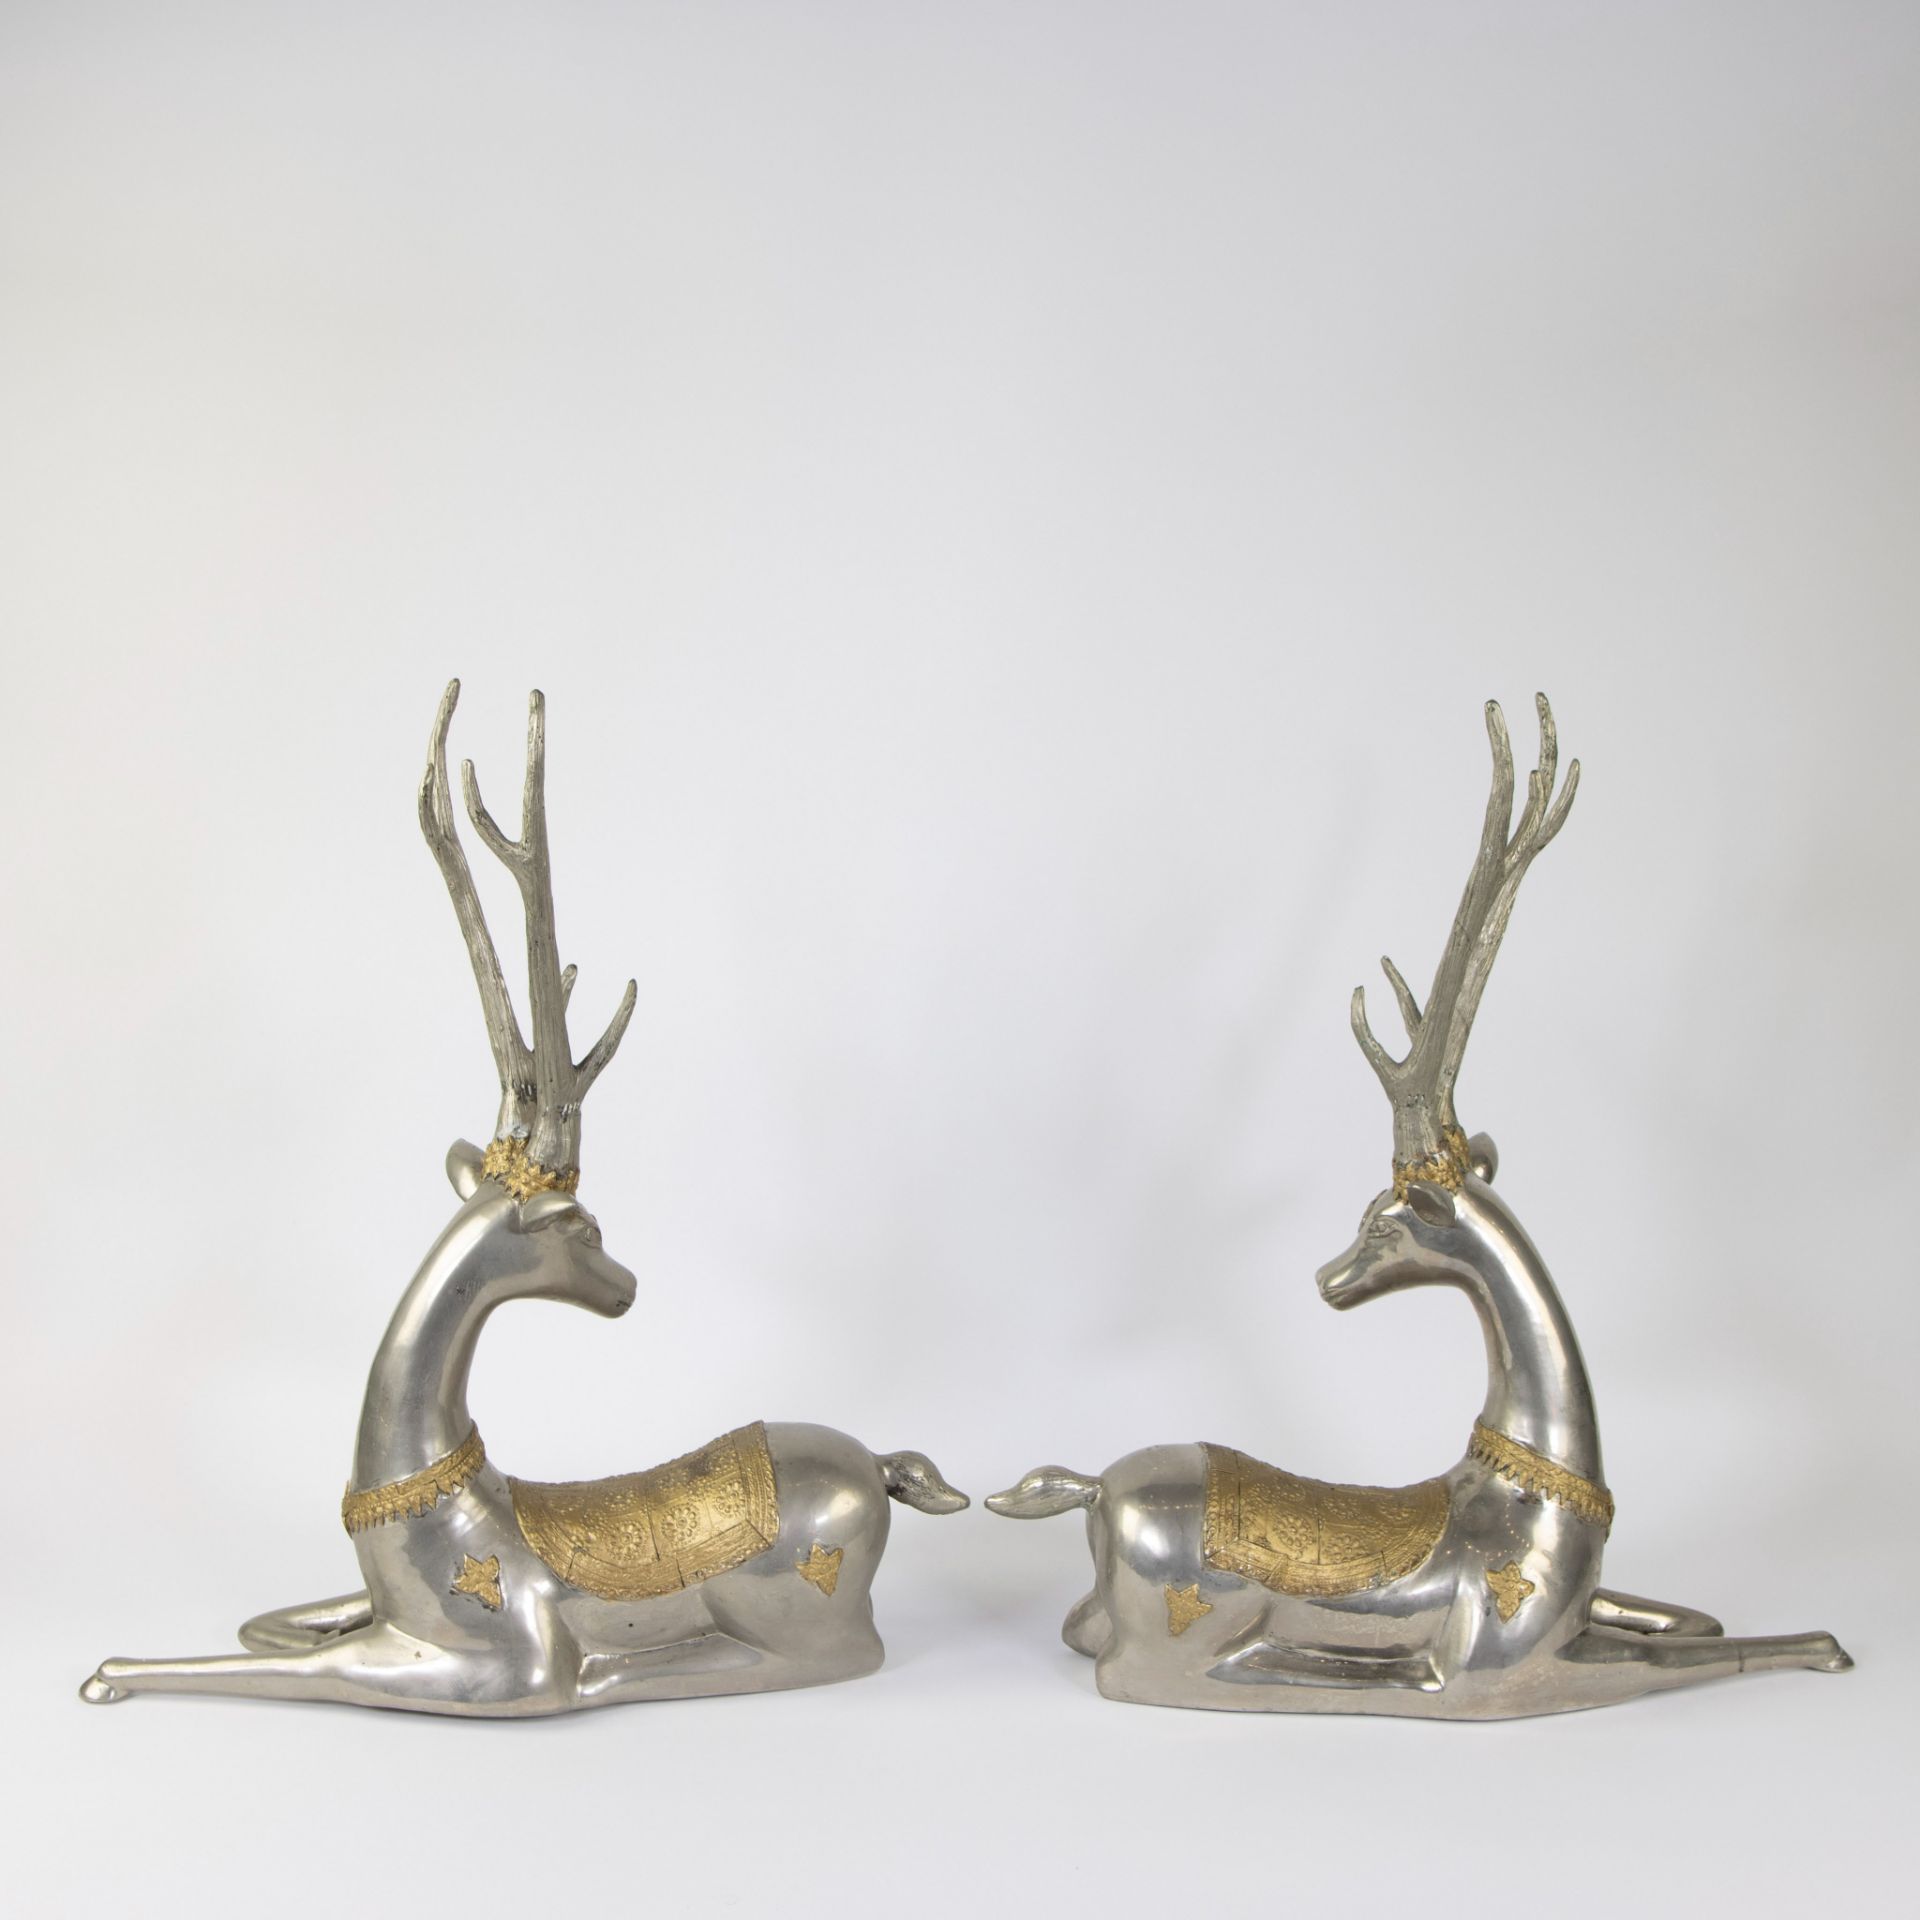 Pair of silver-plated and gilded deer in brass - Image 3 of 5